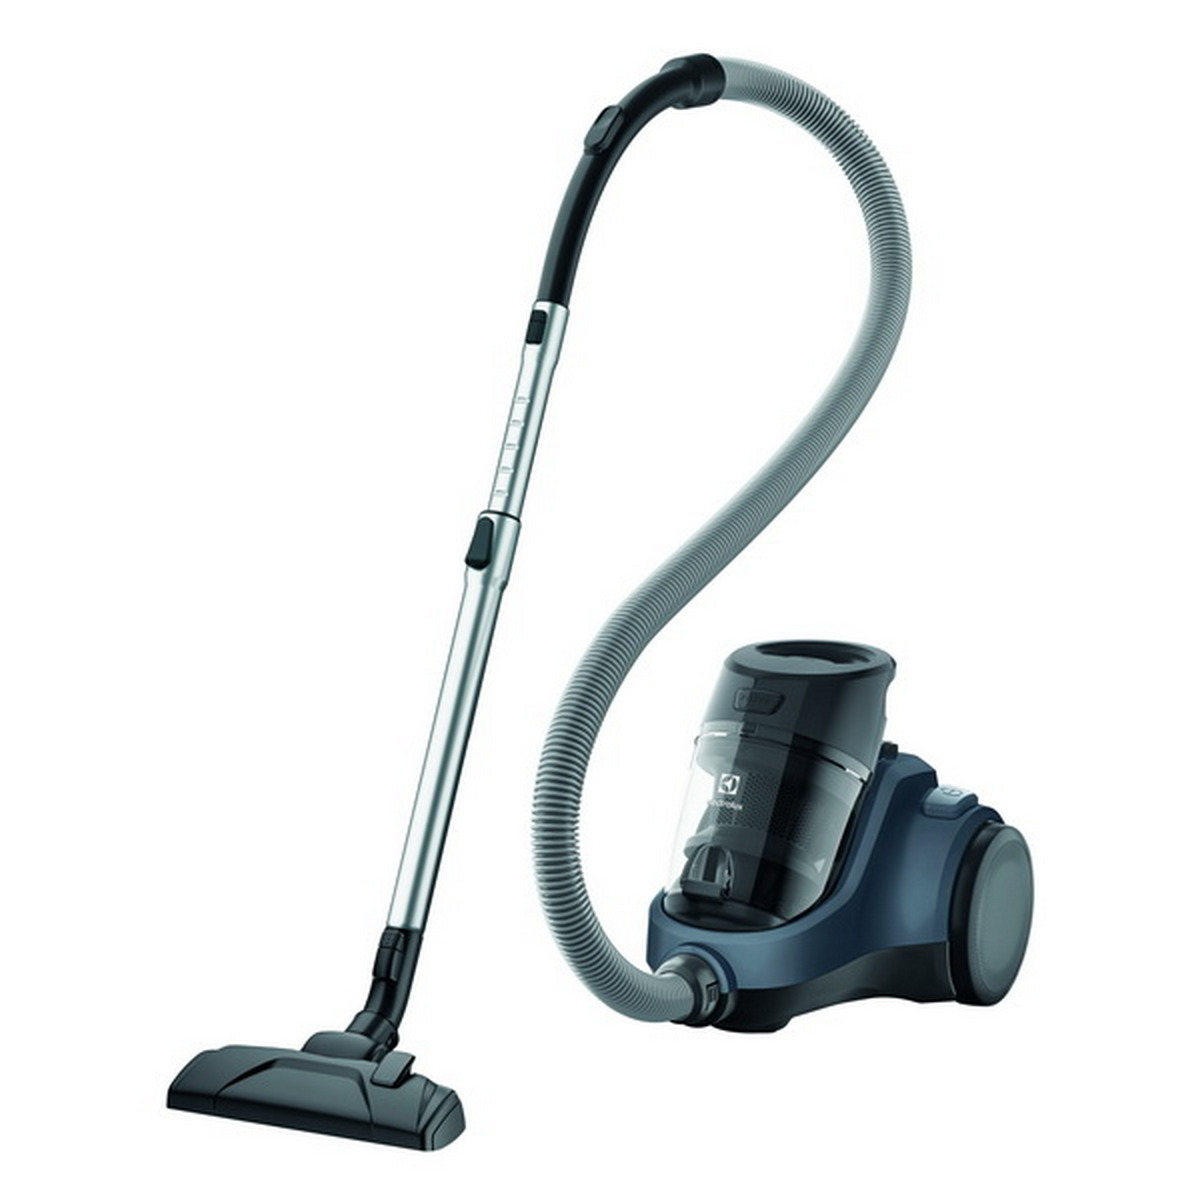 Electrolux Canister Vacuum Cleaner (1.8L,2000W) EC41-2DB